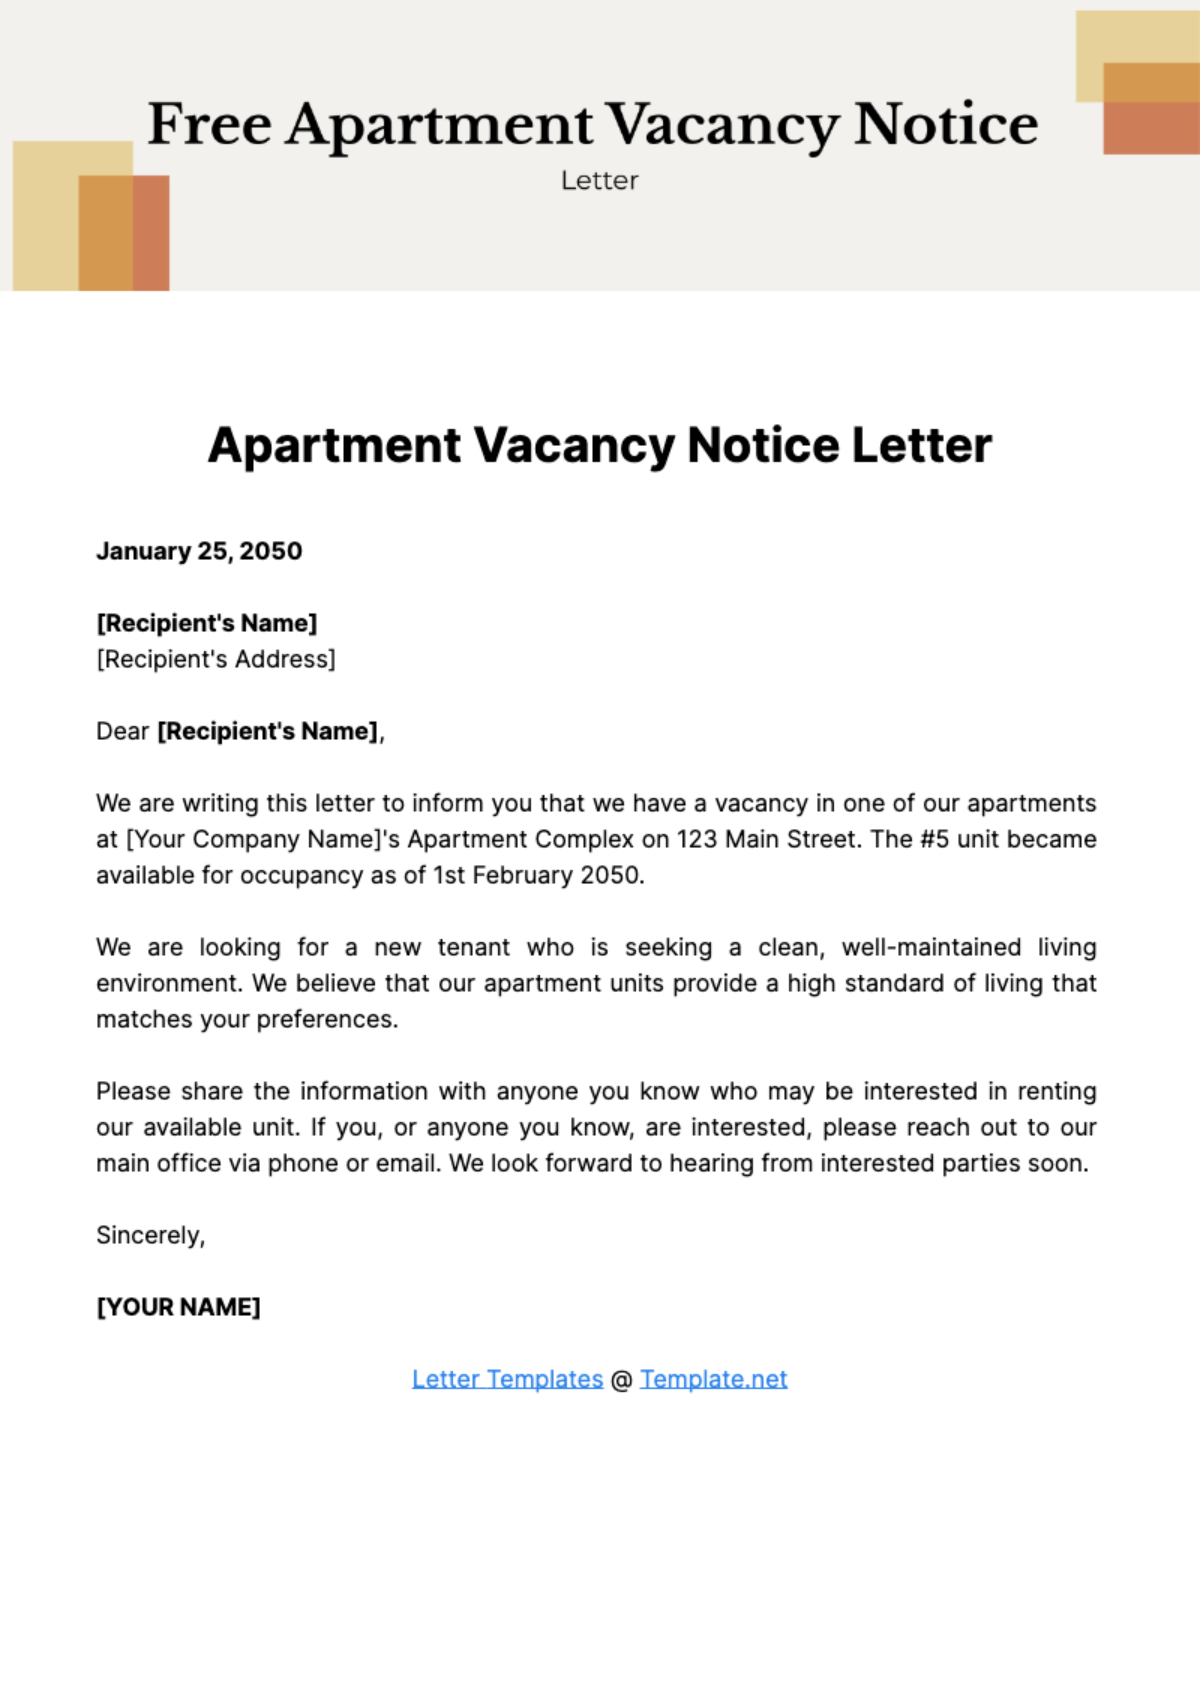 Free Apartment Vacancy Notice Letter Template